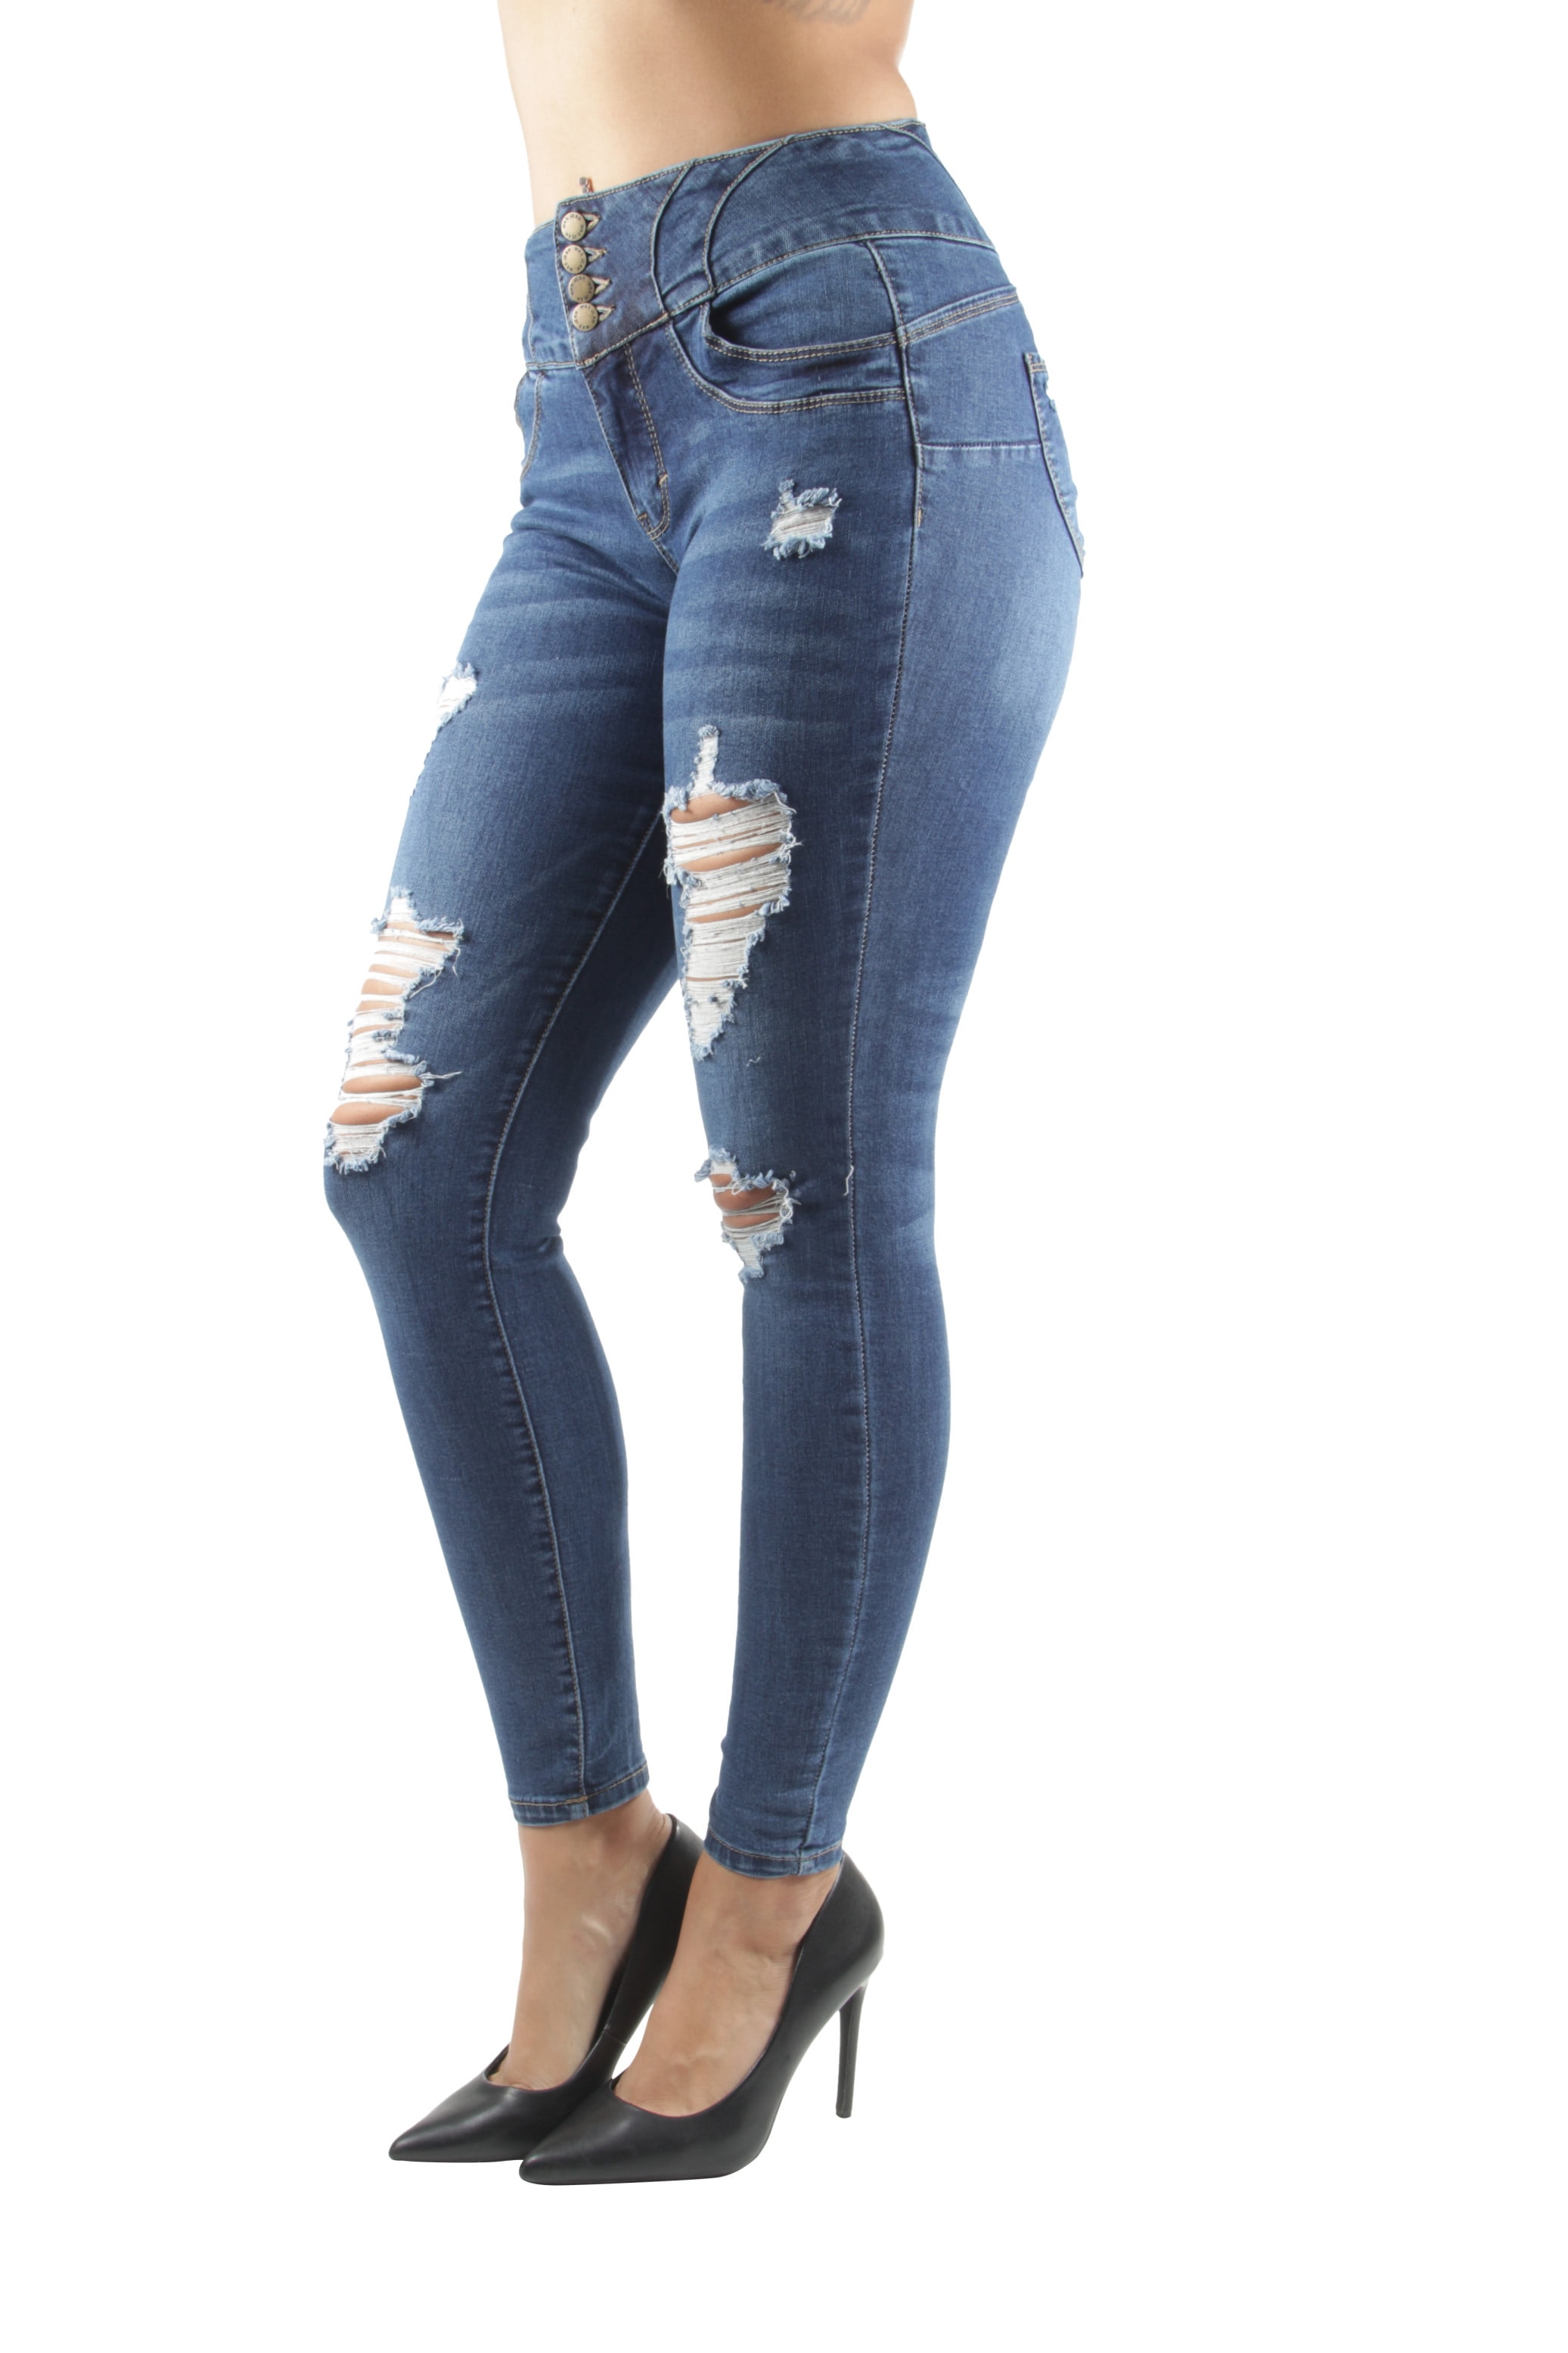 Women's Juniors Button Fly High Waist Fitted Premium Skinny Jeans 